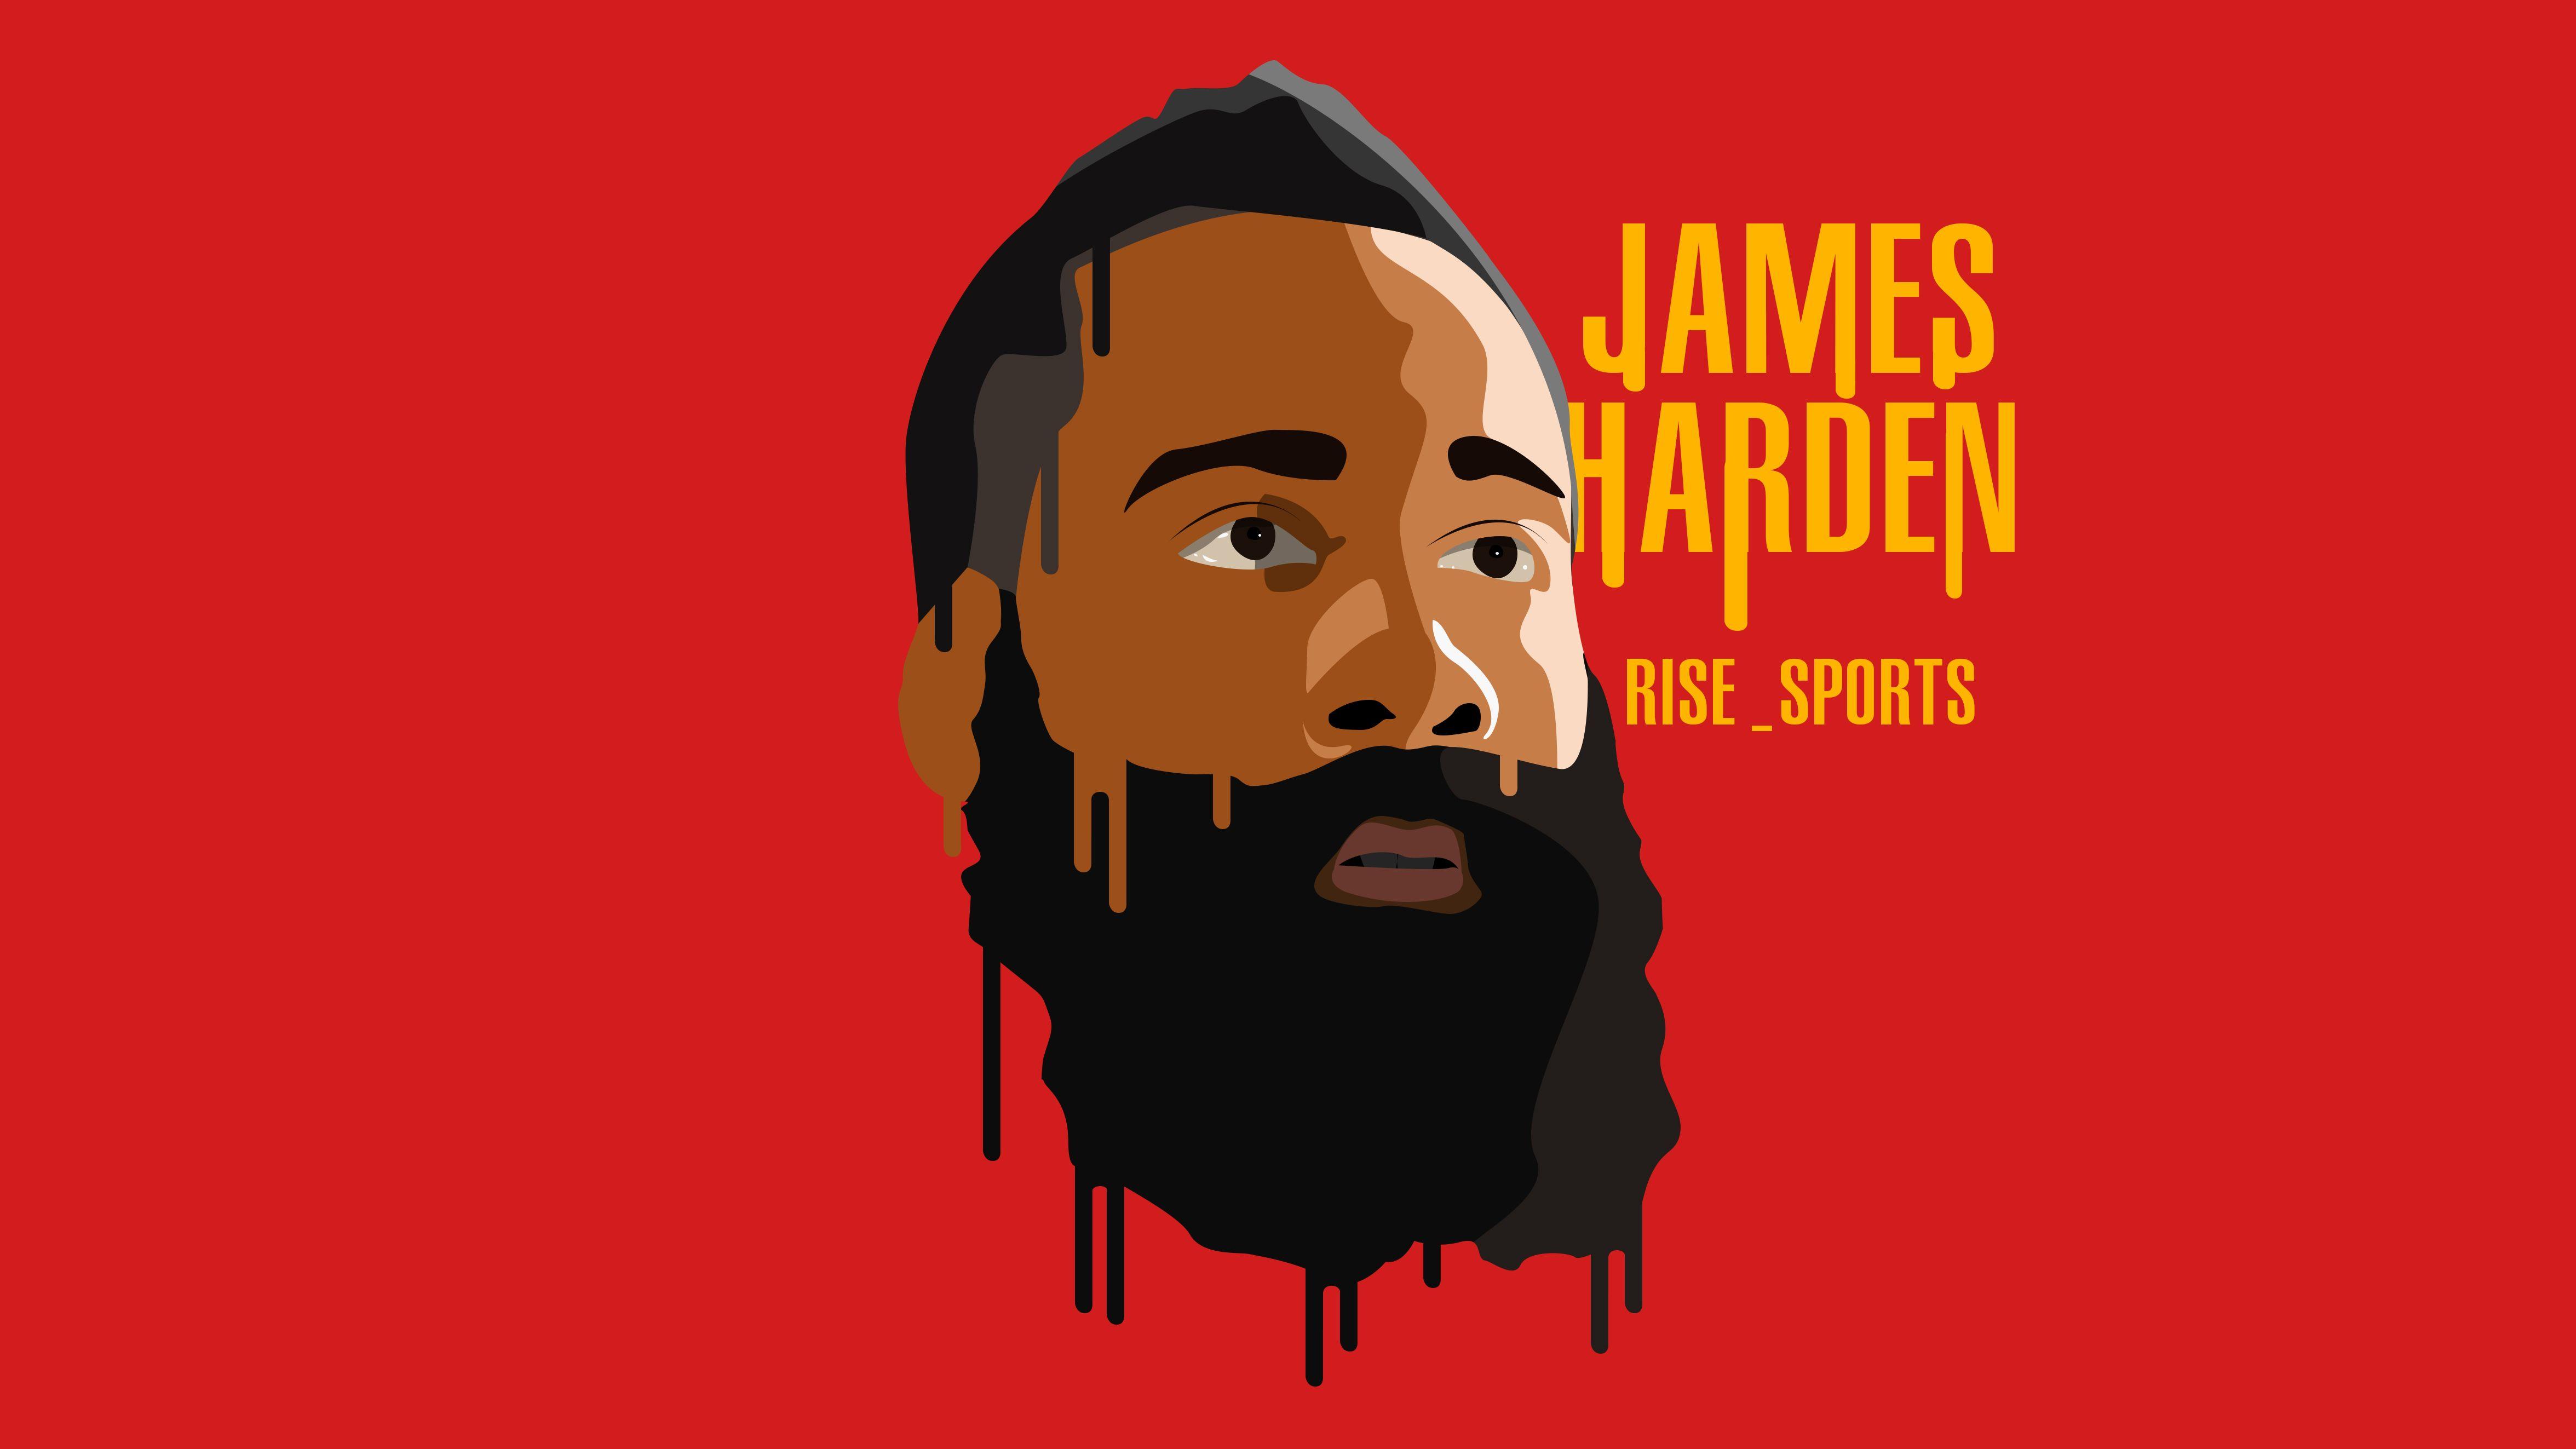 James Harden Wallpaper High Resolution and Quality Download